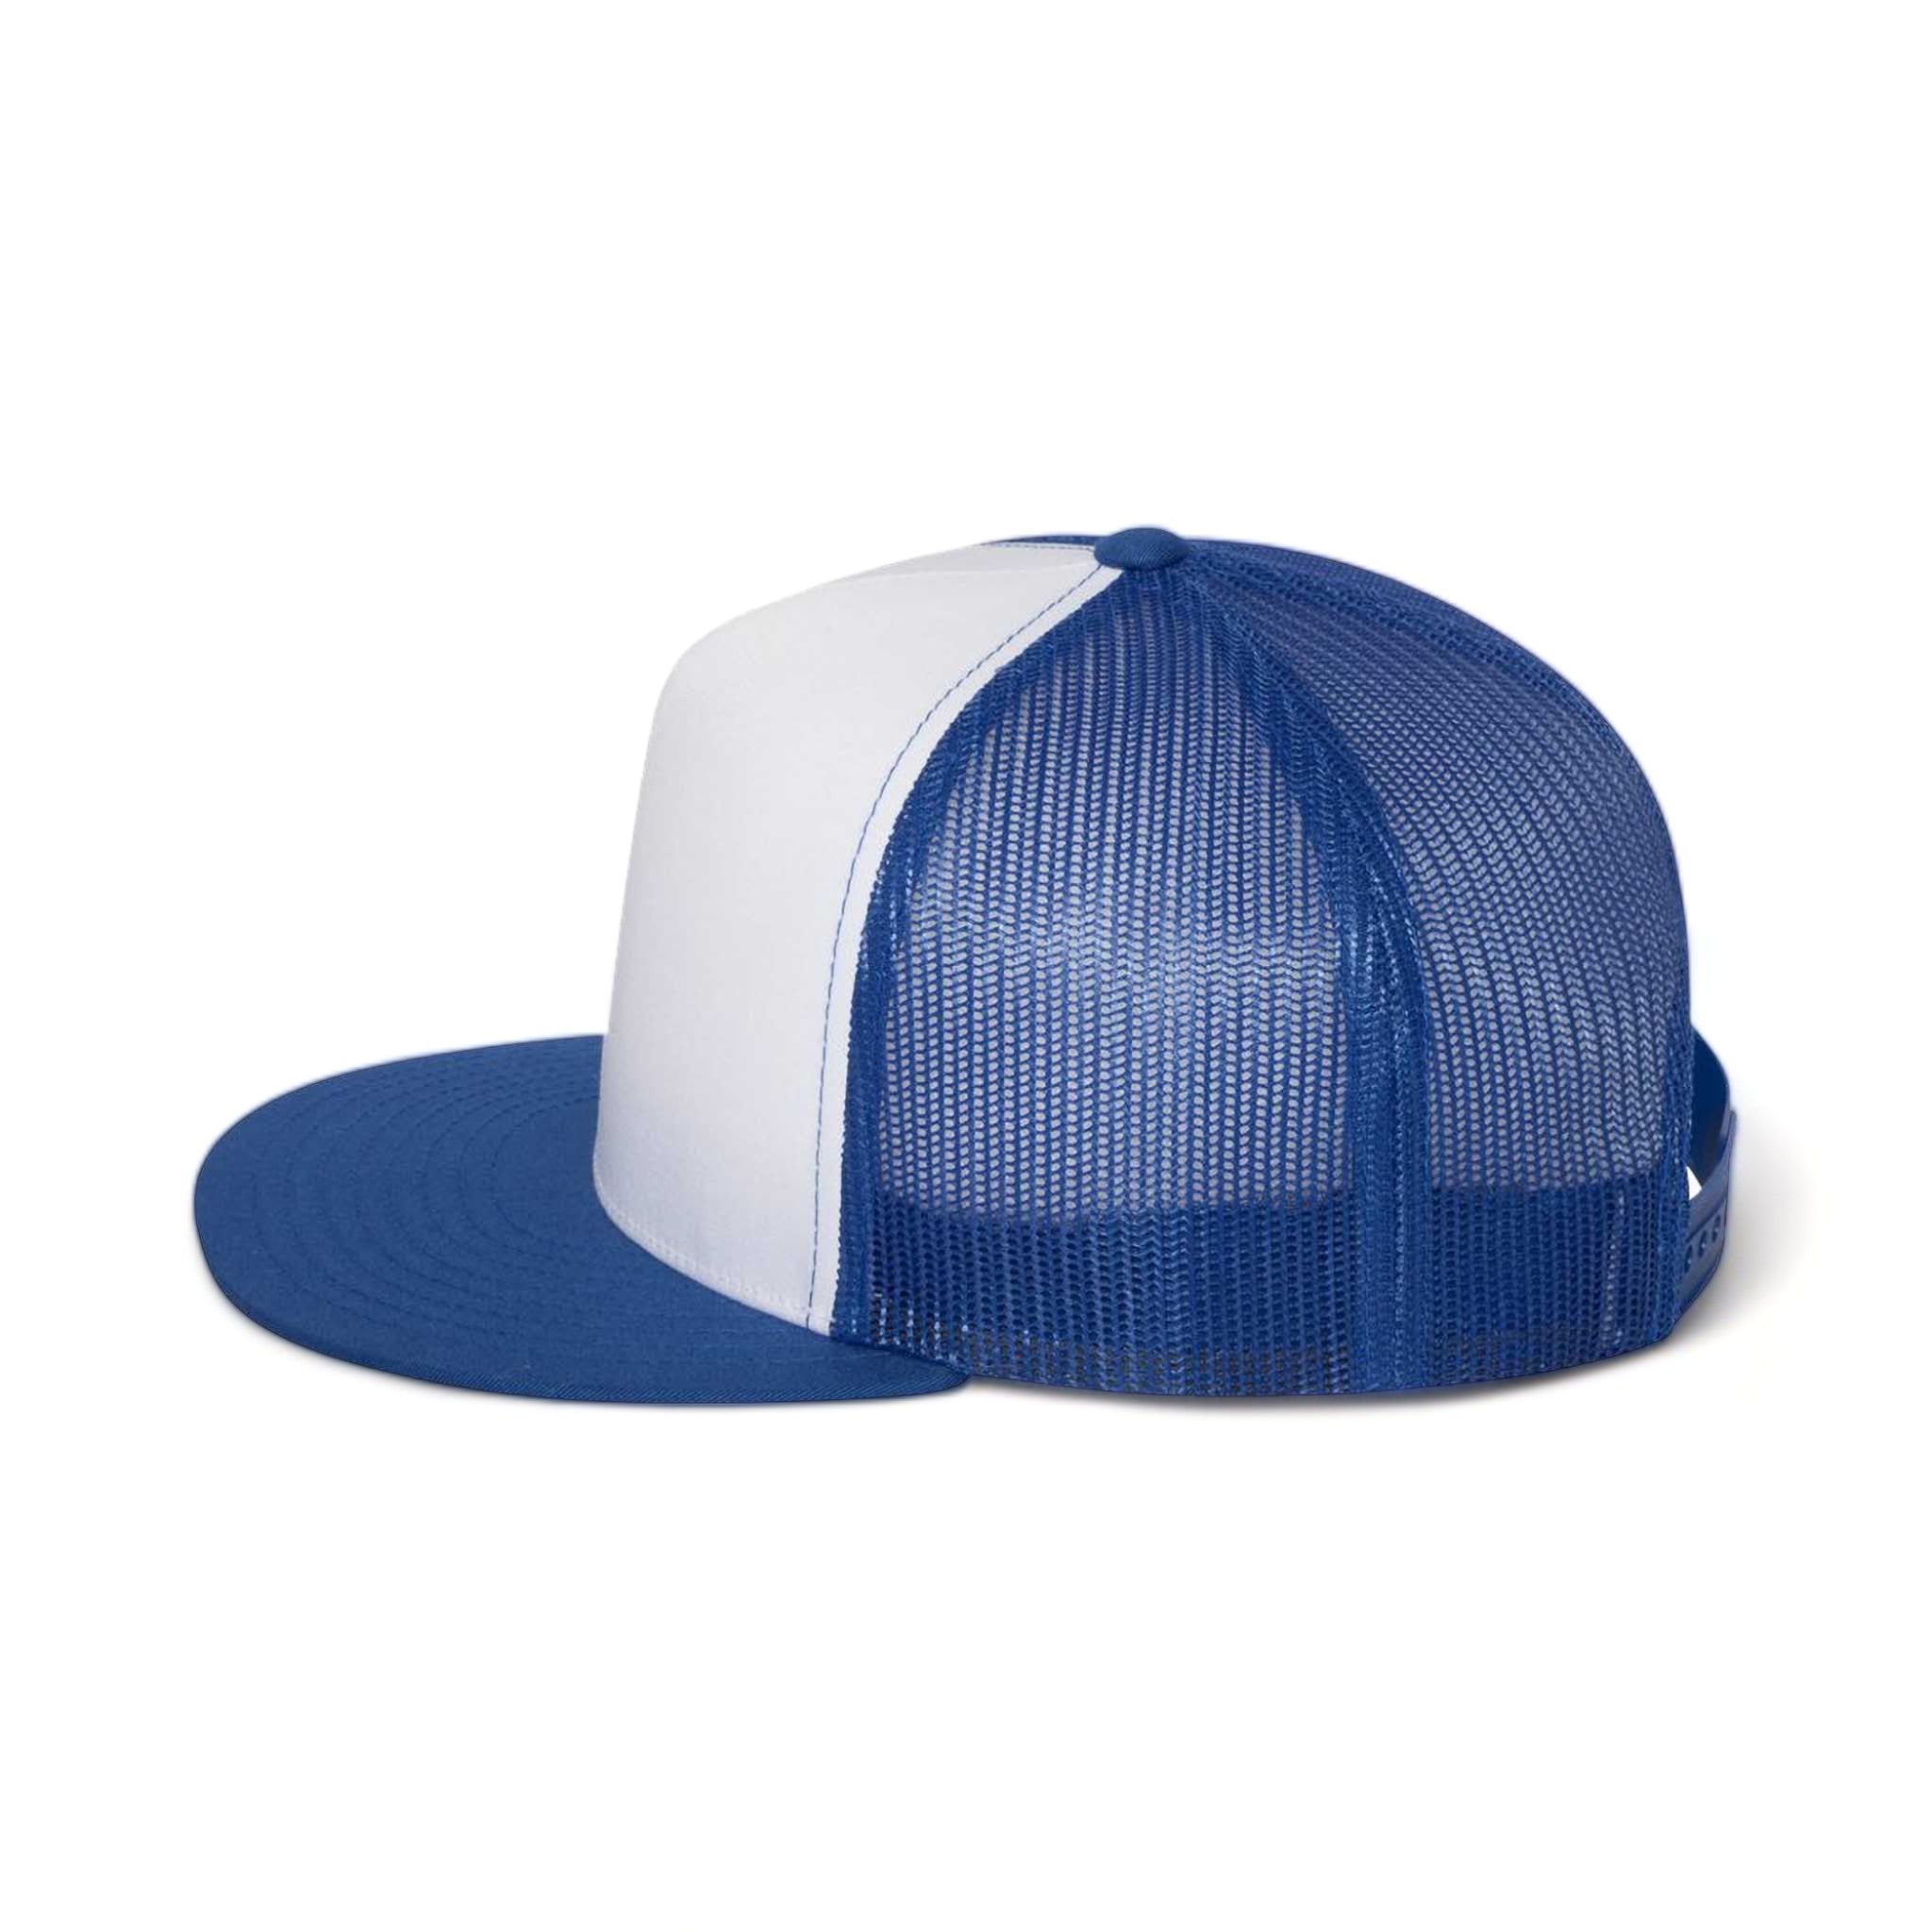 Side view of YP Classics 6006 custom hat in royal, white and royal